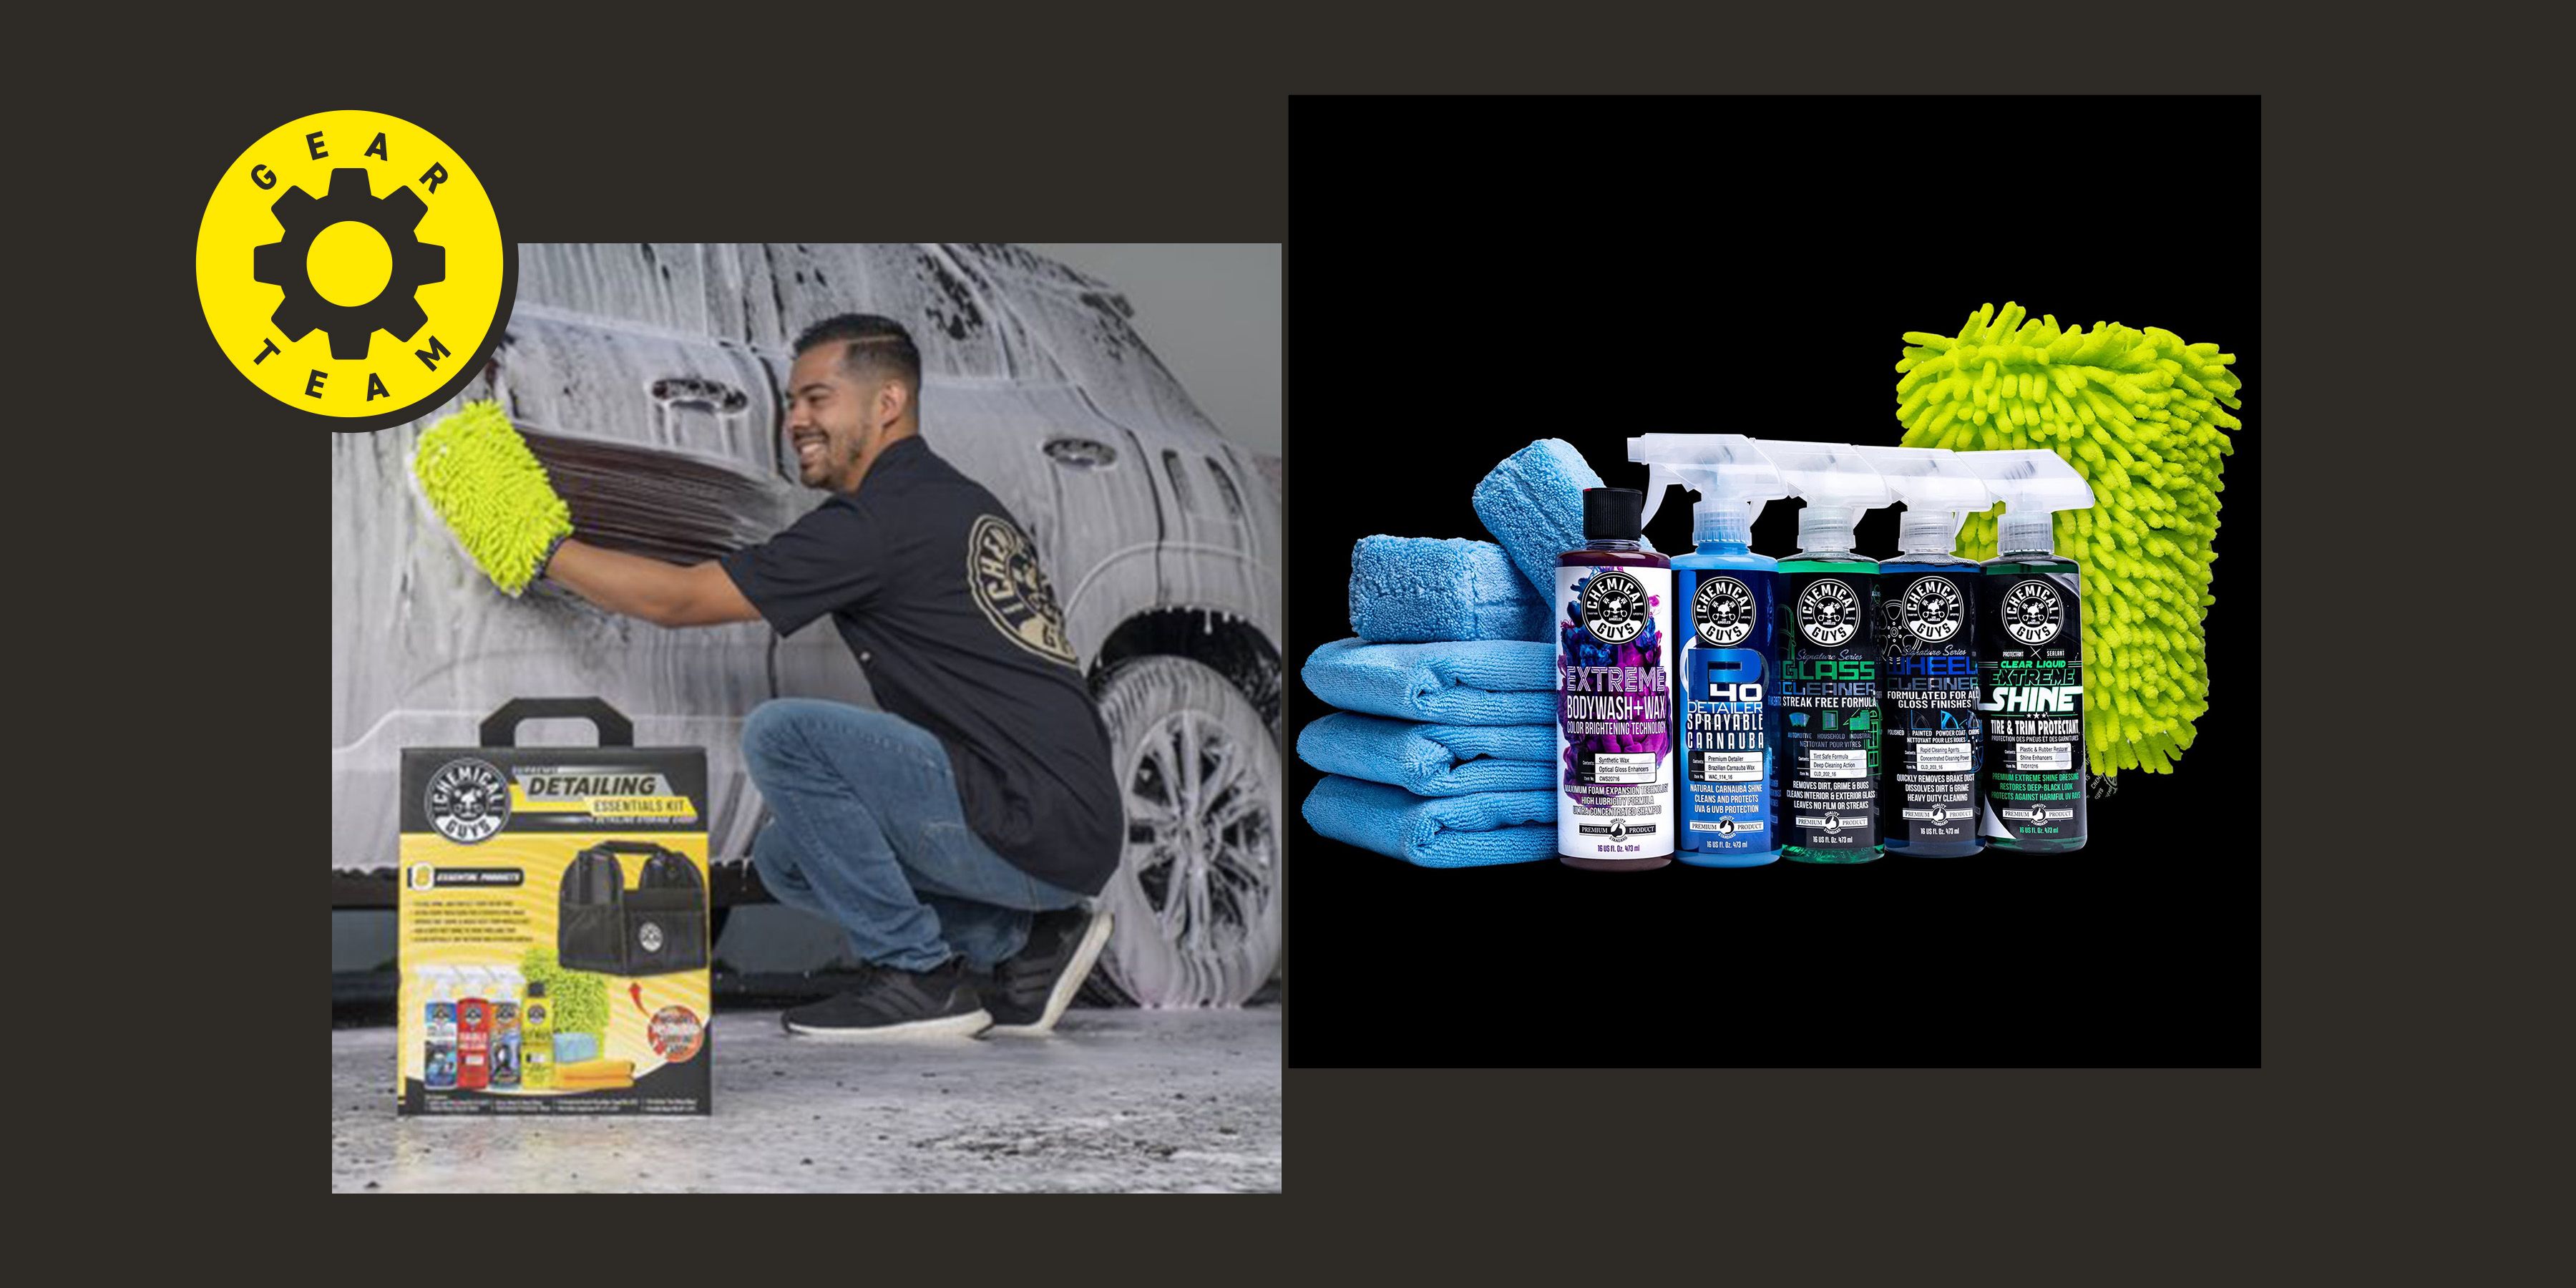 Supreme Detailing Essentials Kit | Car Detailing | Vehicle Cleaning Kit | Chemical Guys